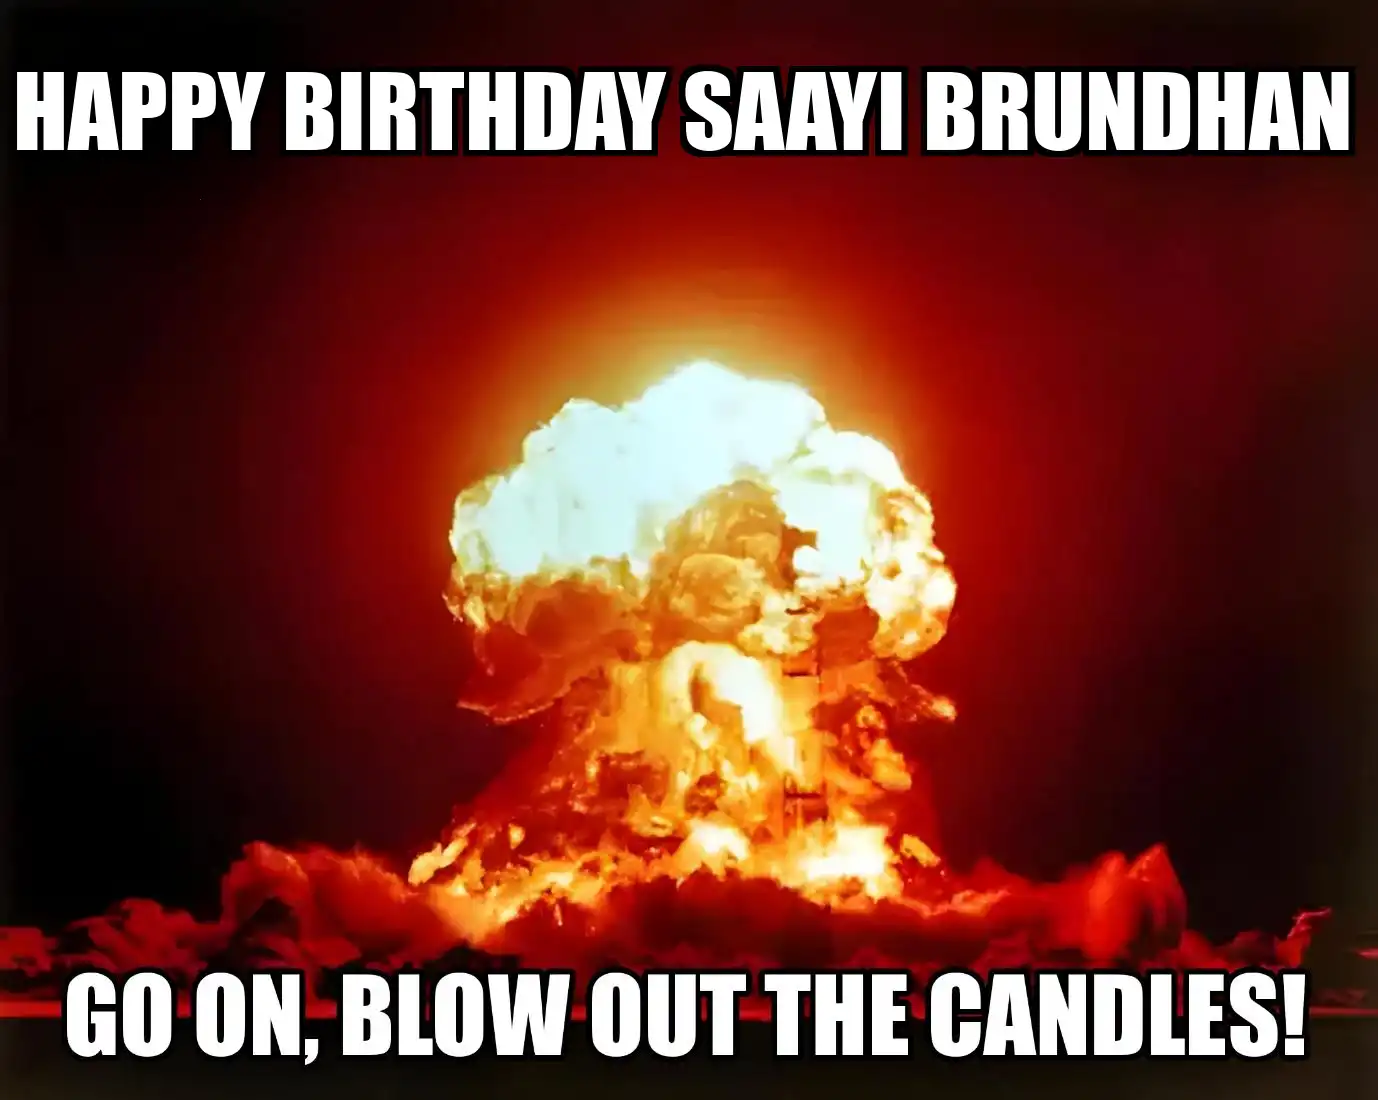 Happy Birthday Saayi brundhan Go On Blow Out The Candles Meme